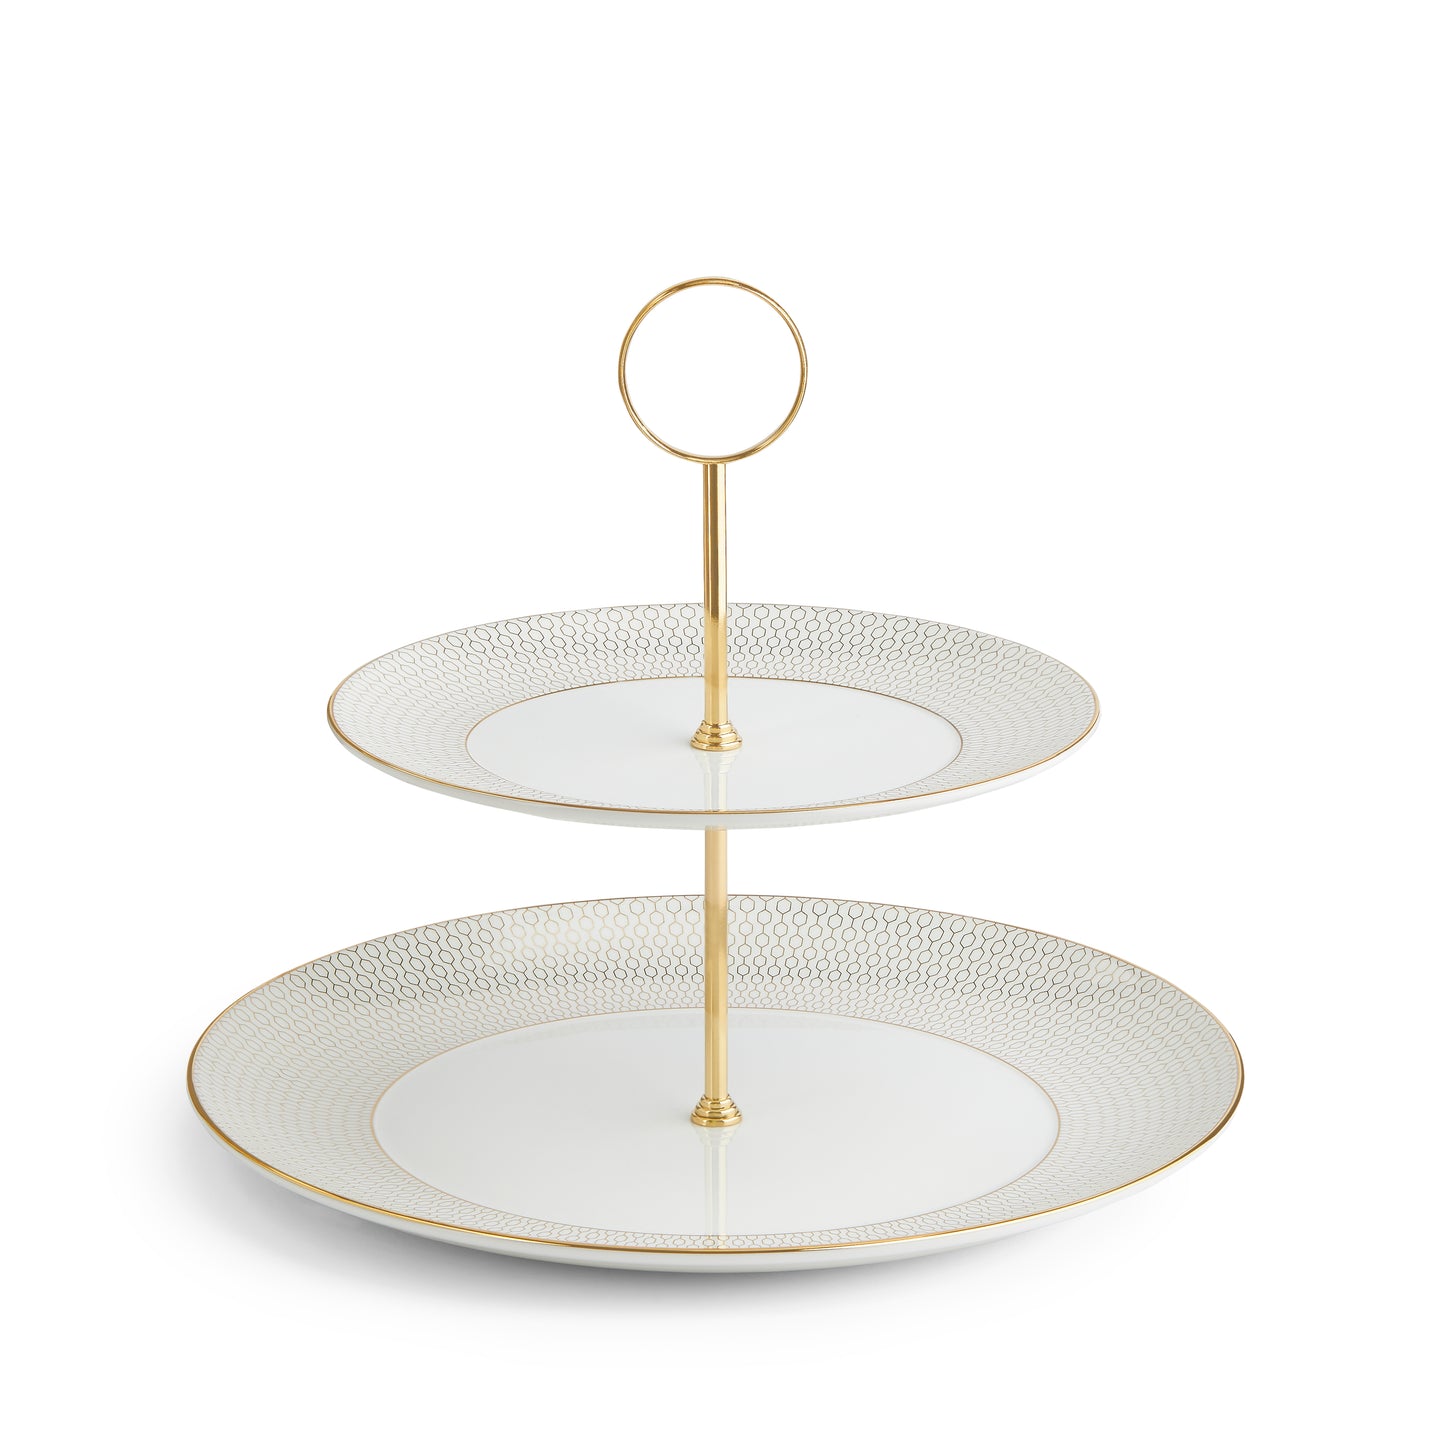 Wedgwood Gio Gold 2 Tier Cake Stand